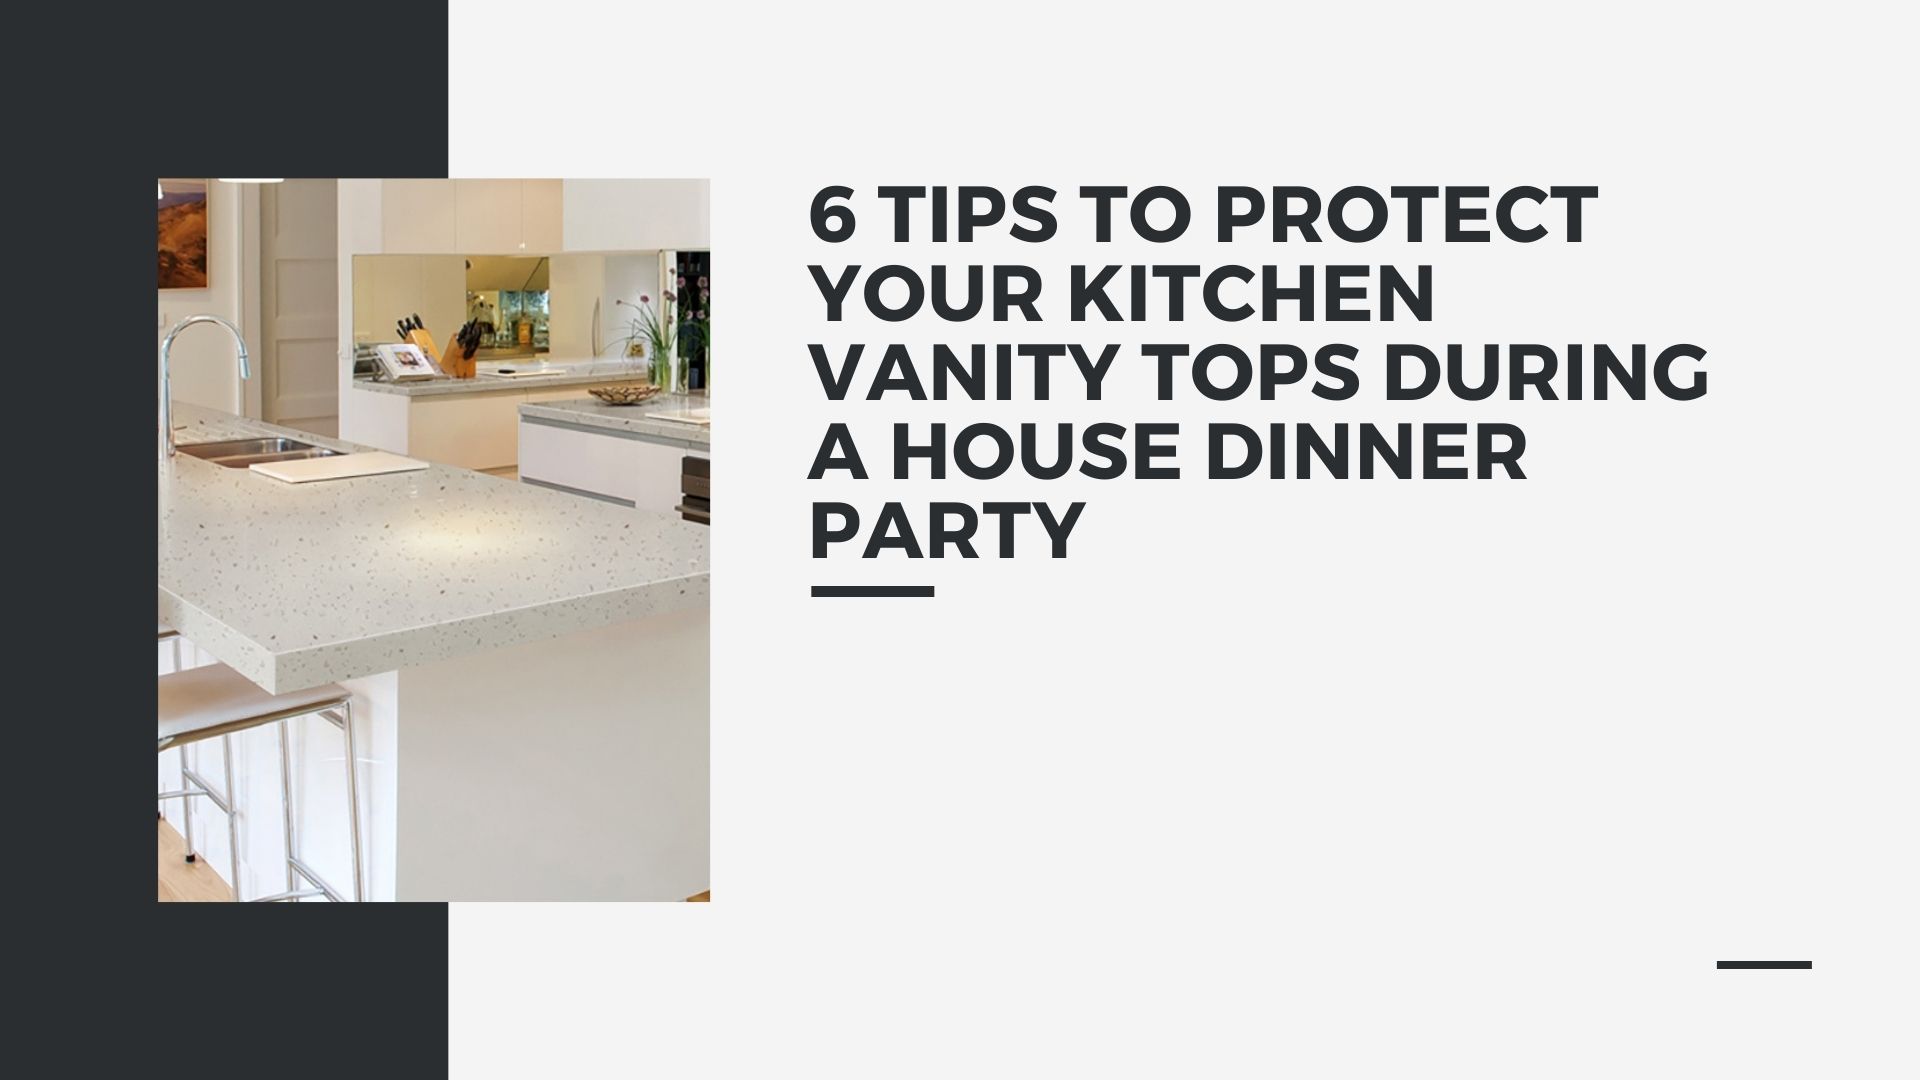 6 Tips to Protect Your Kitchen Vanity Tops During a House Dinner